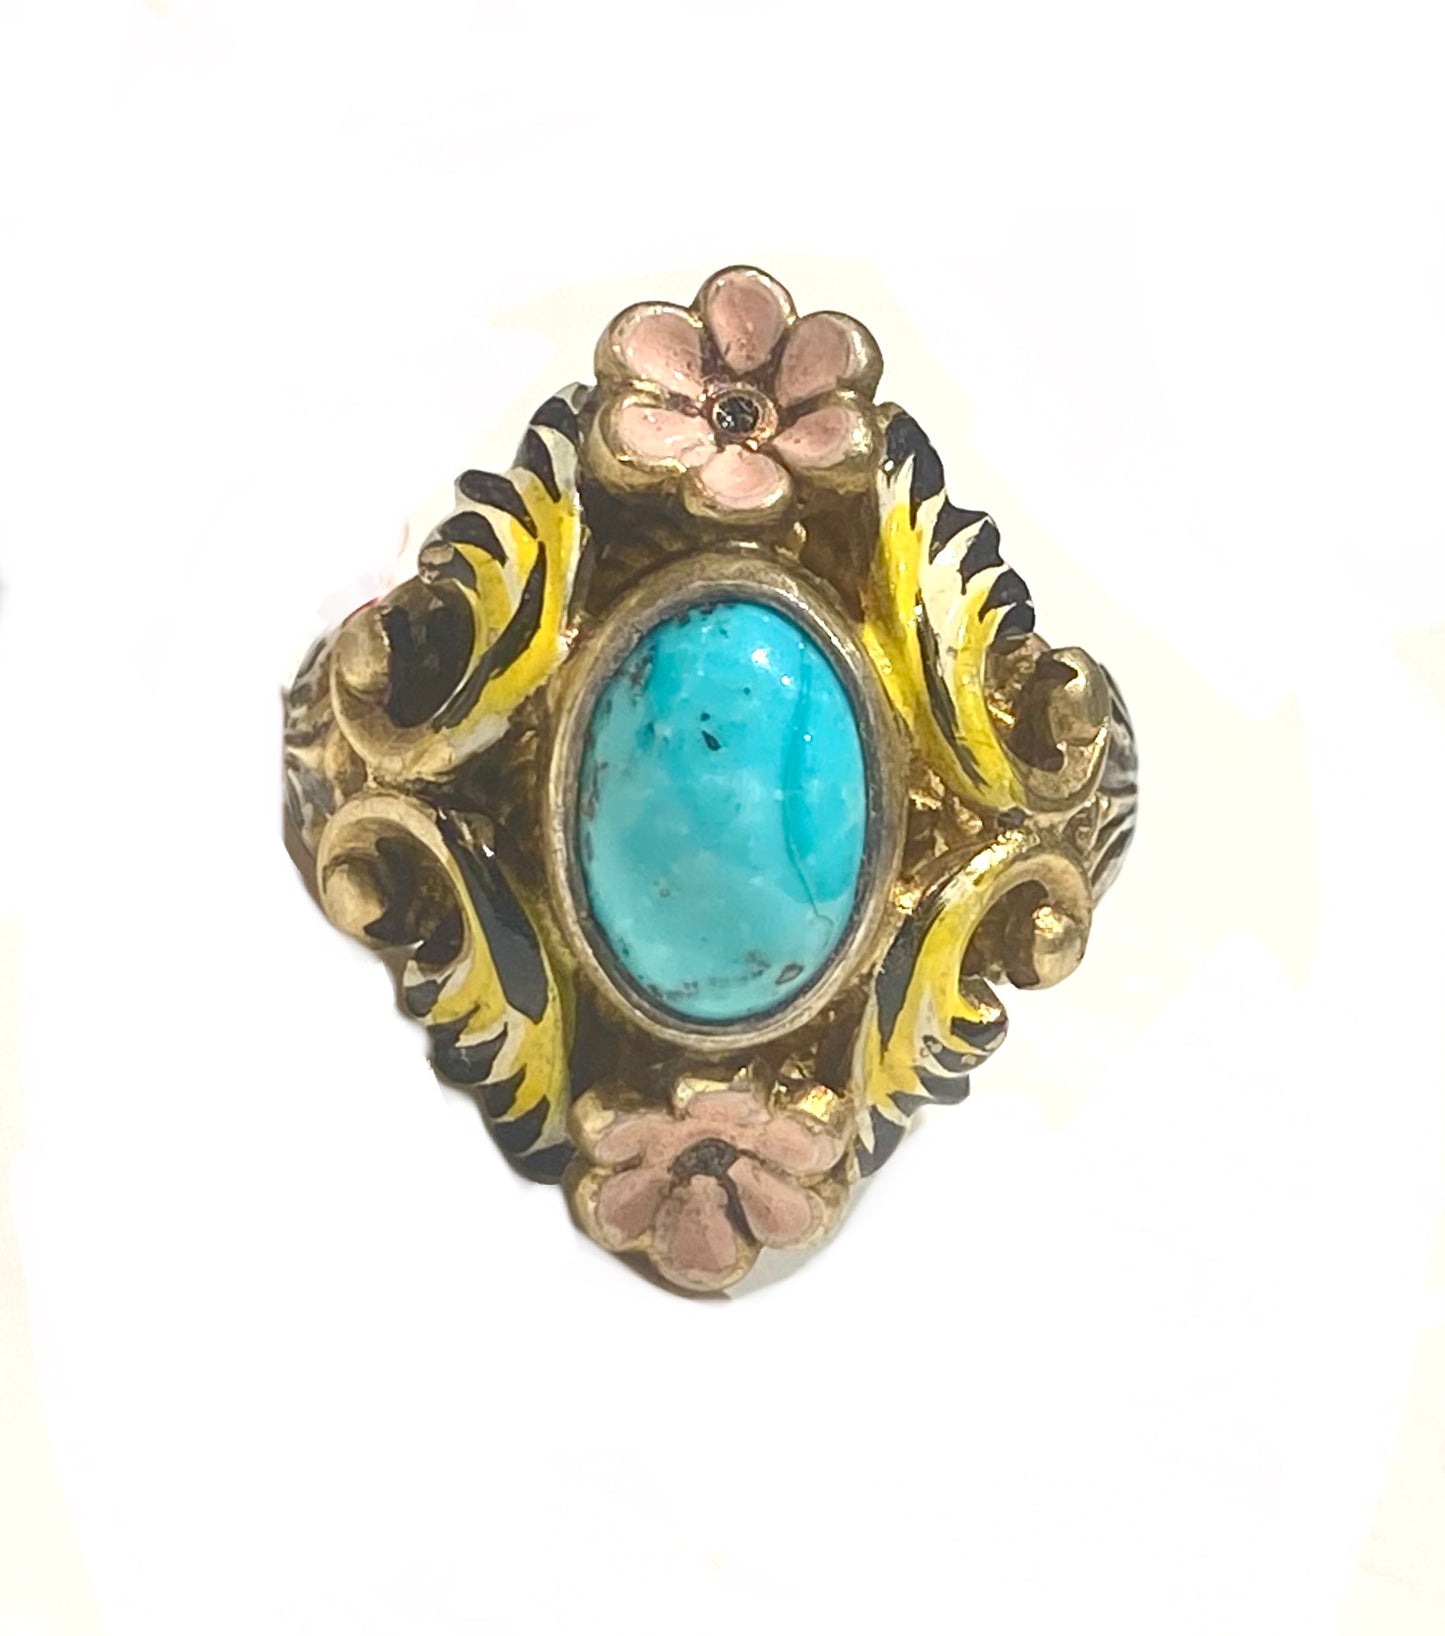 Turquoise cameo & pink enamel gold plated 925 silver ring, 60s NOS